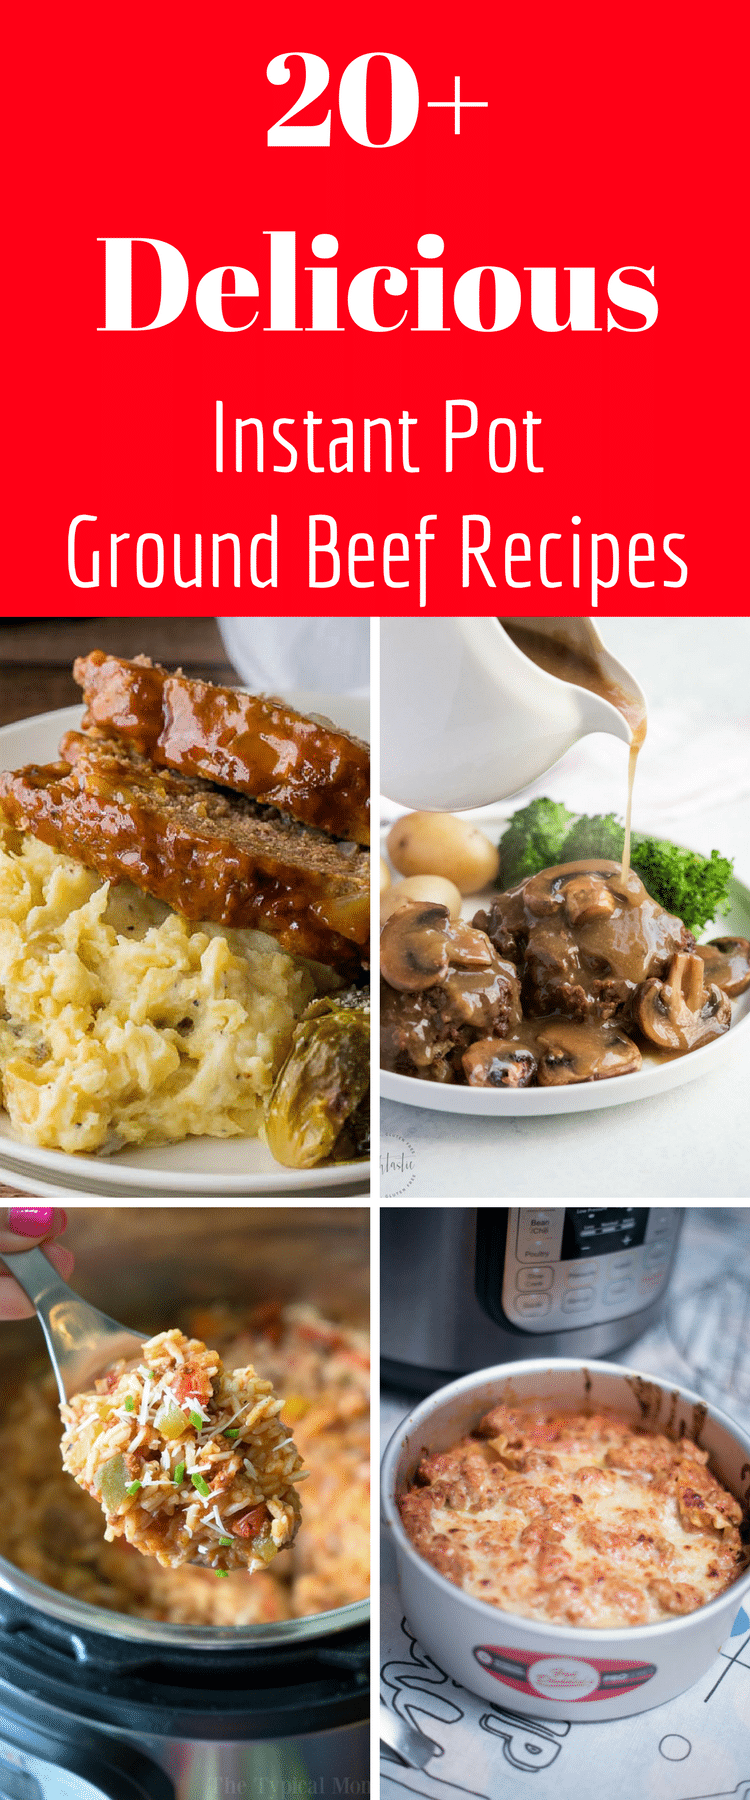 Looking for Instant Pot Ground beef recipes? Here are over 20 AMAZING ground beef recipes that are EASY and DELICIOUS! -   16 ground recipes crockpot
 ideas